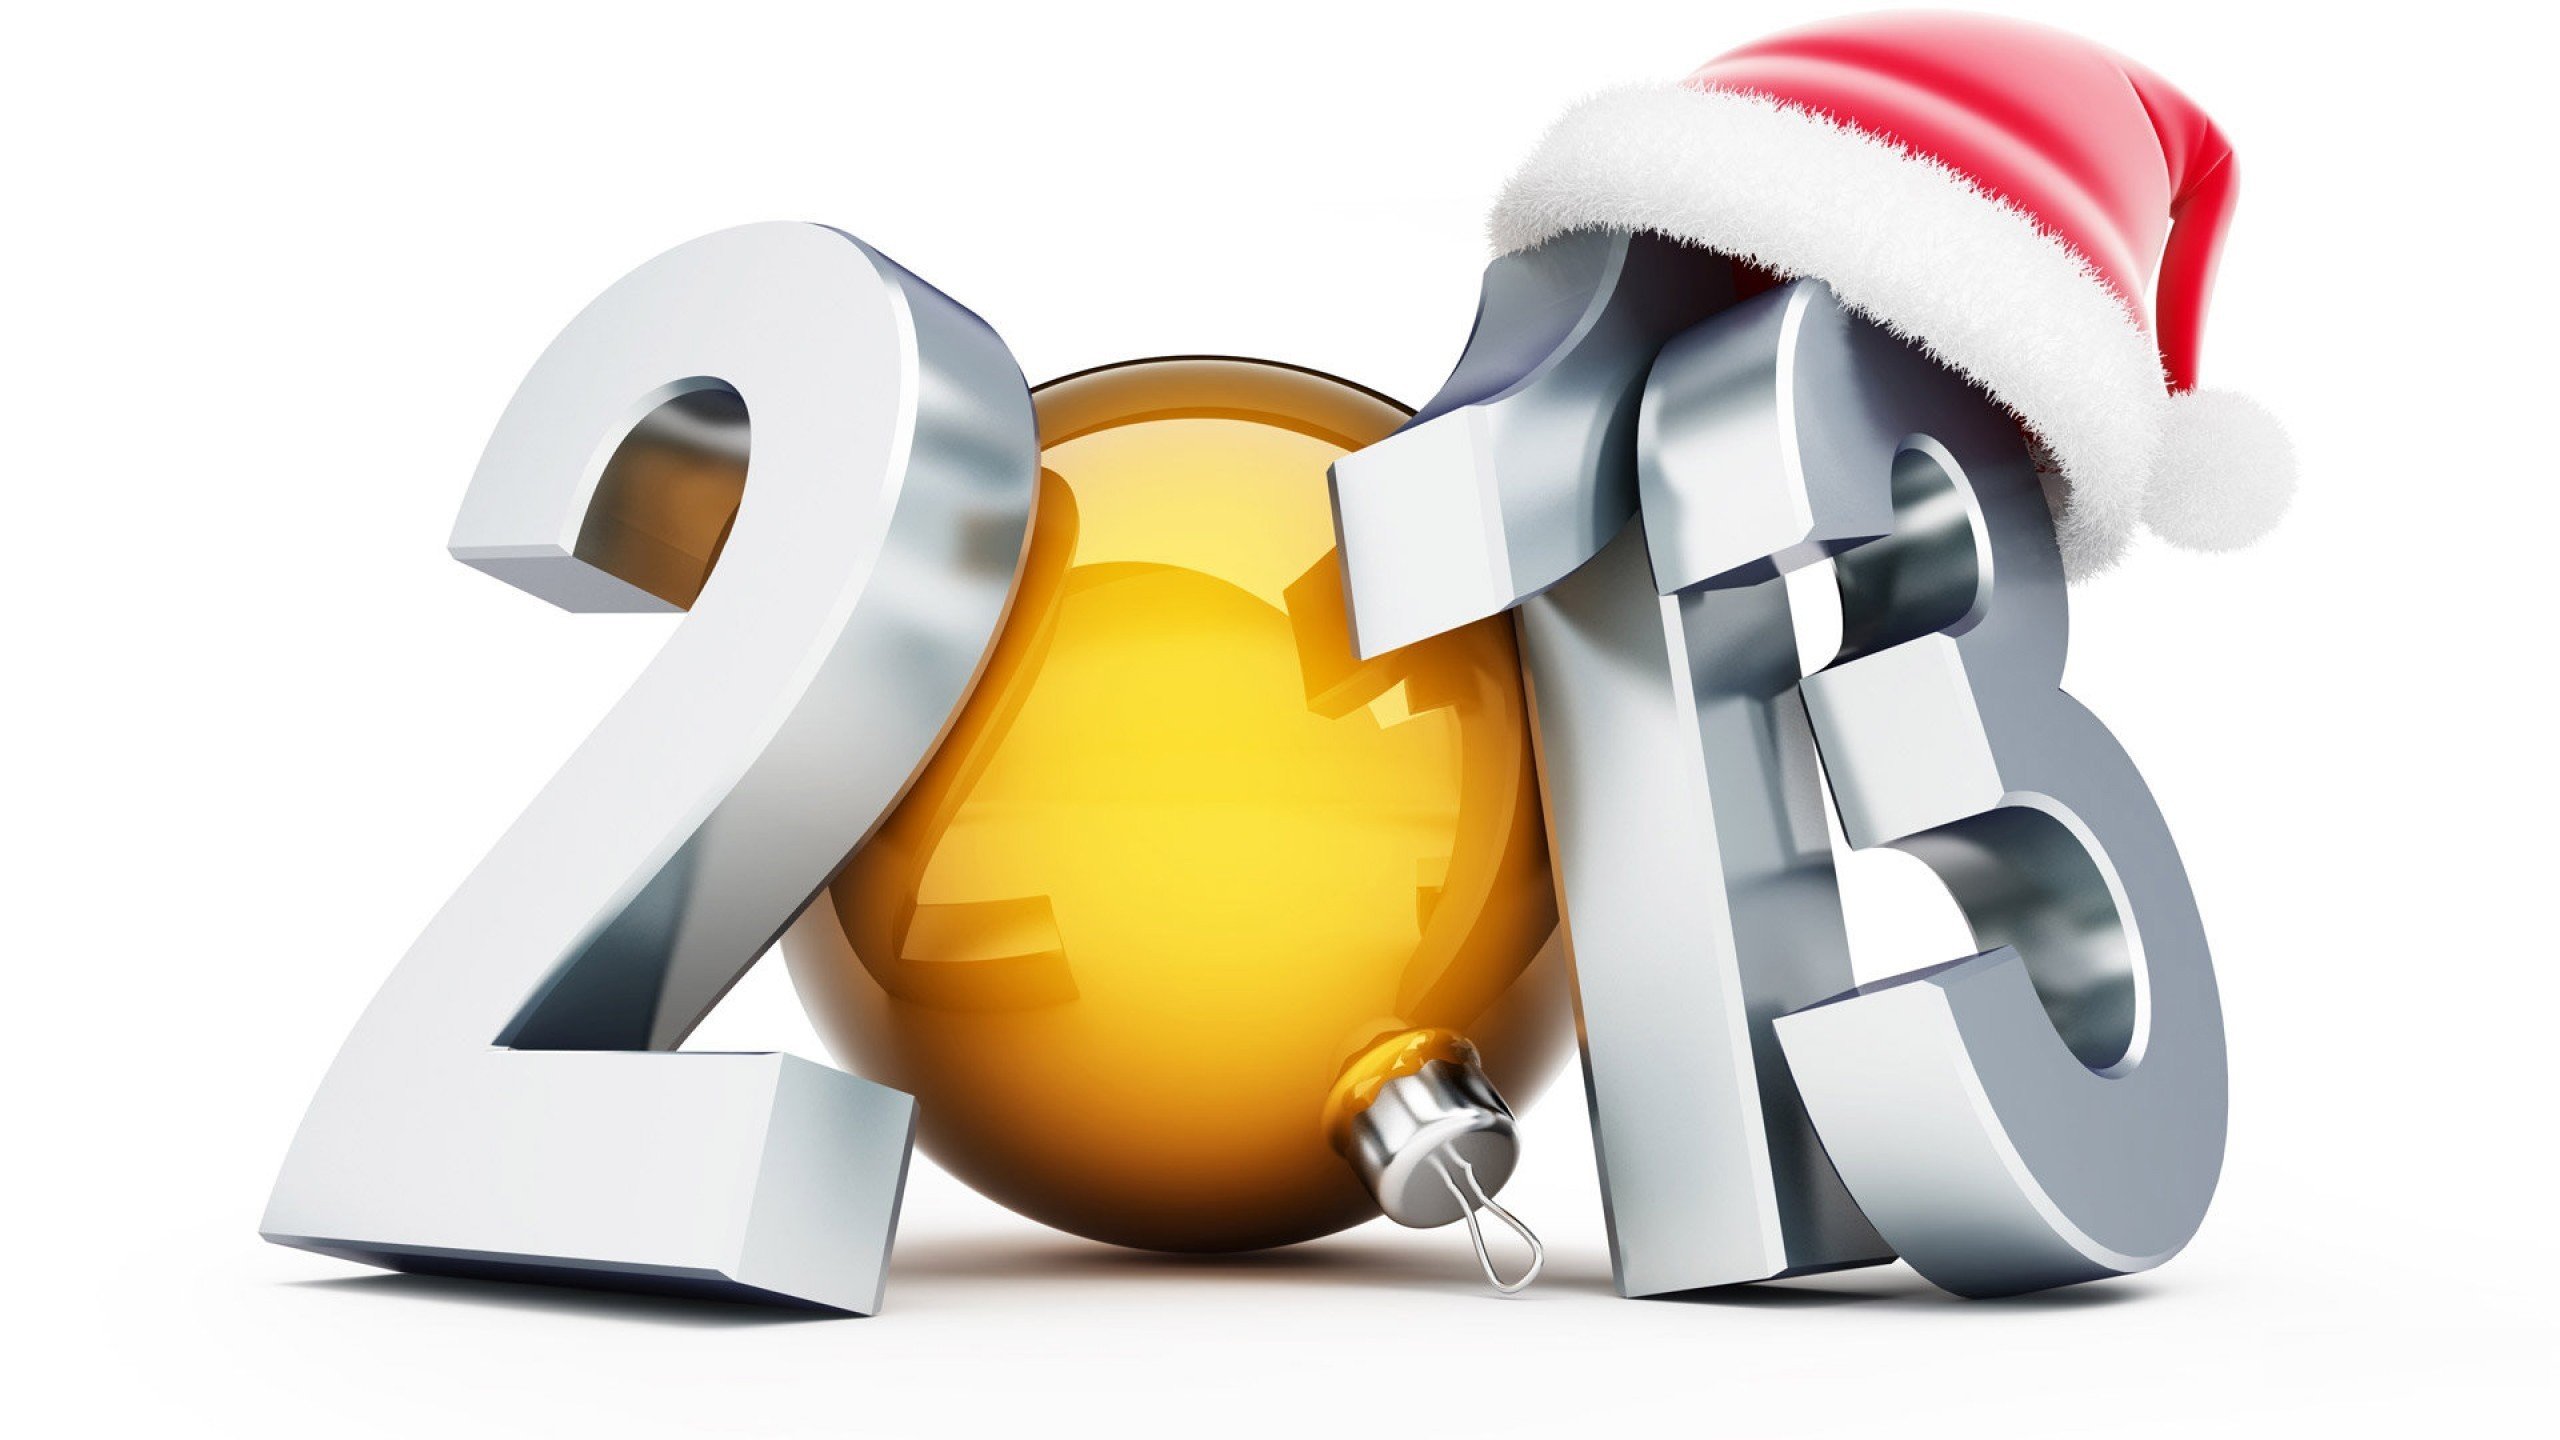 Free download New Year 2013 wallpaper ID:115014 hd 2560x1440 for computer